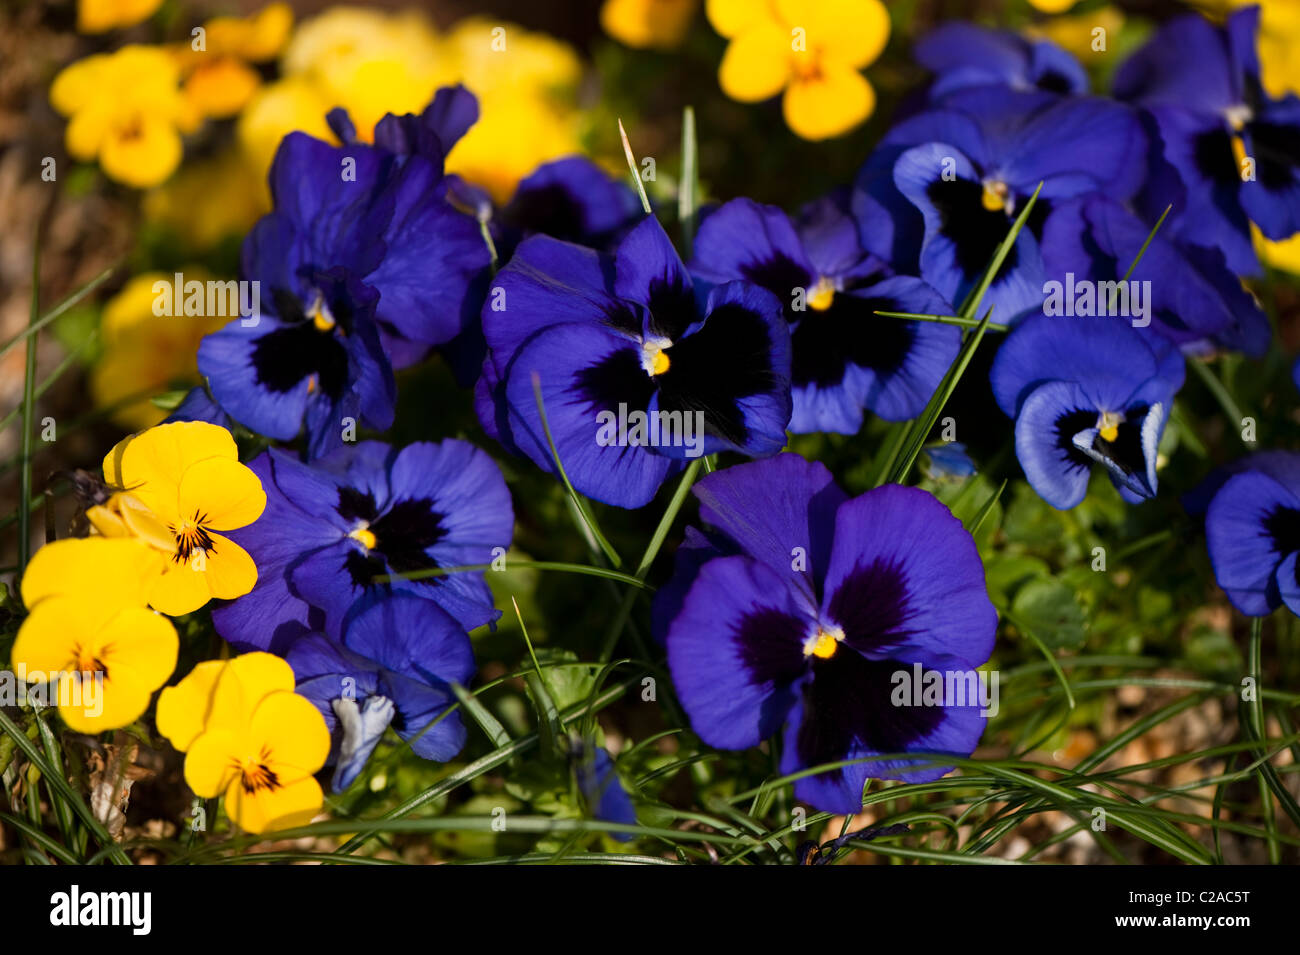 Blue and Yellow Blotch Violas in flower Stock Photo